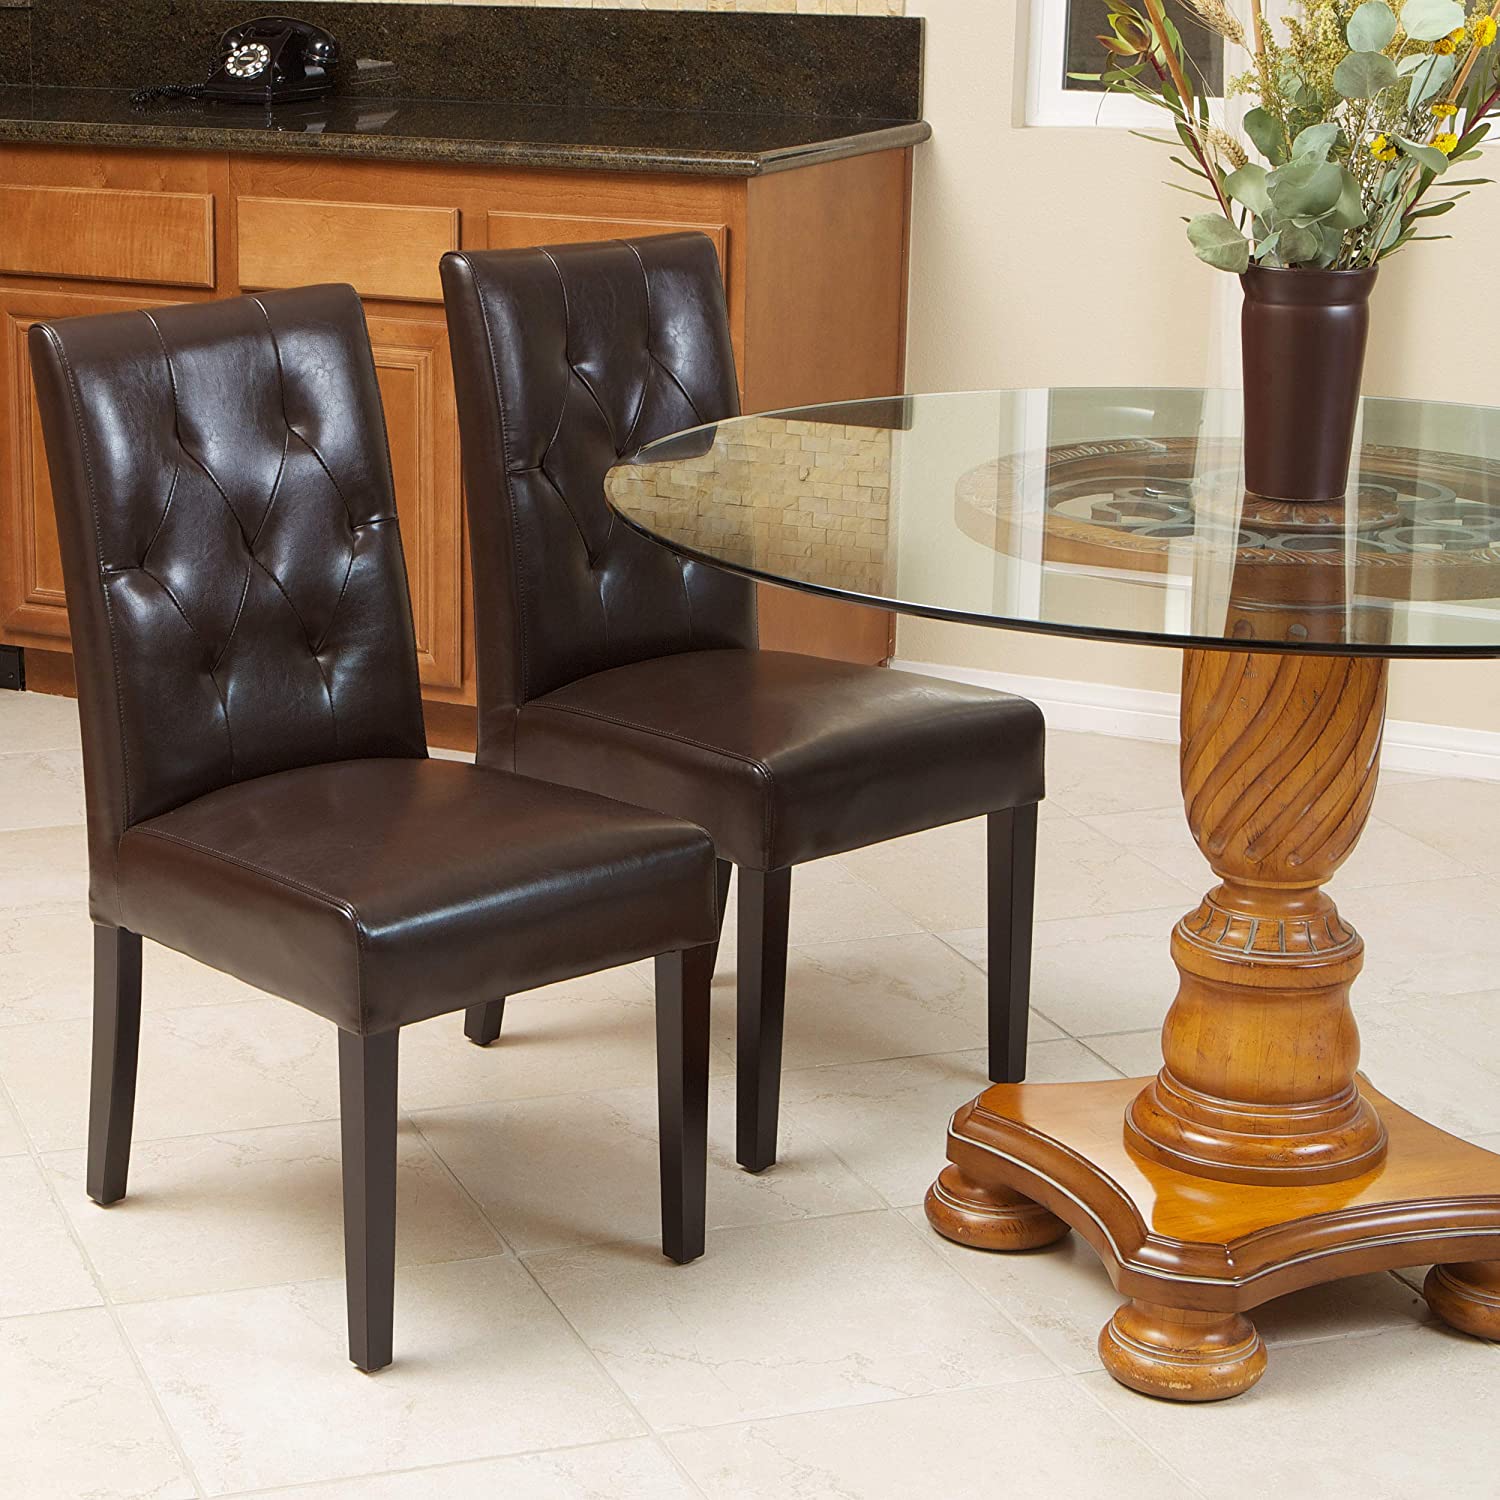 Bonded Leather Dining Chairs, 2-Pcs Set